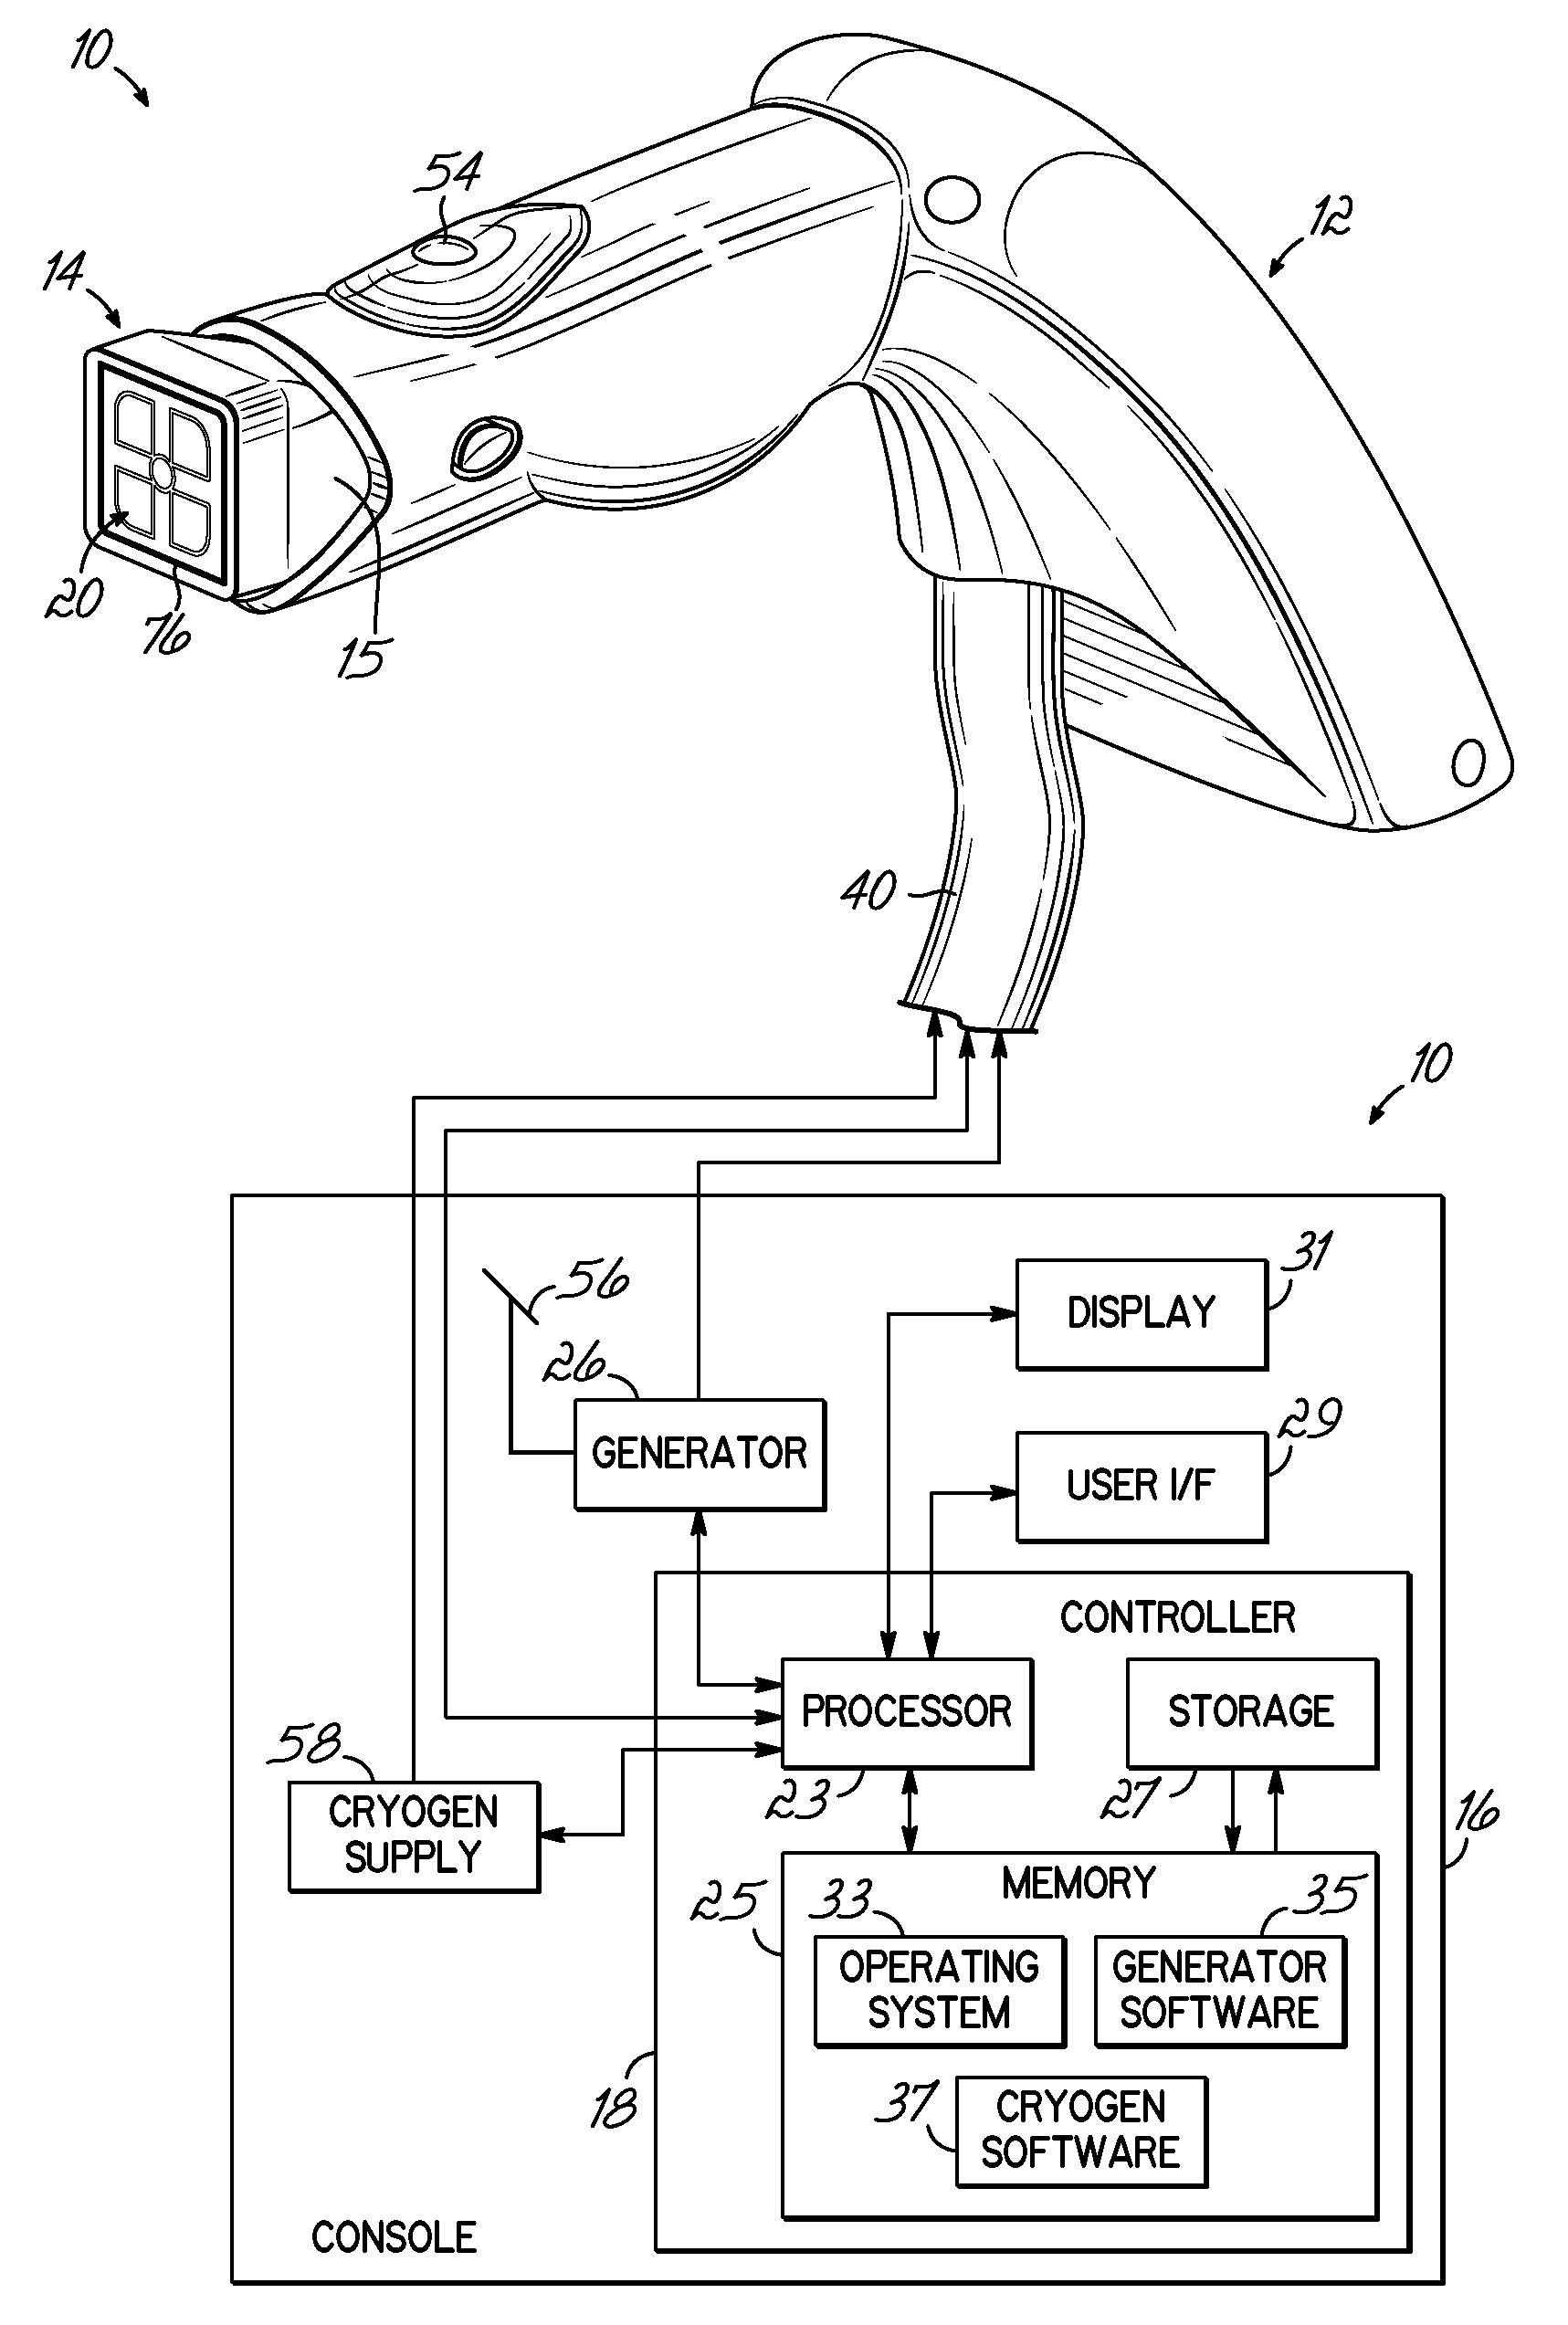 Tissue treatment apparatus and systems with pain mitigation and methods for mitigating pain during tissue treatments